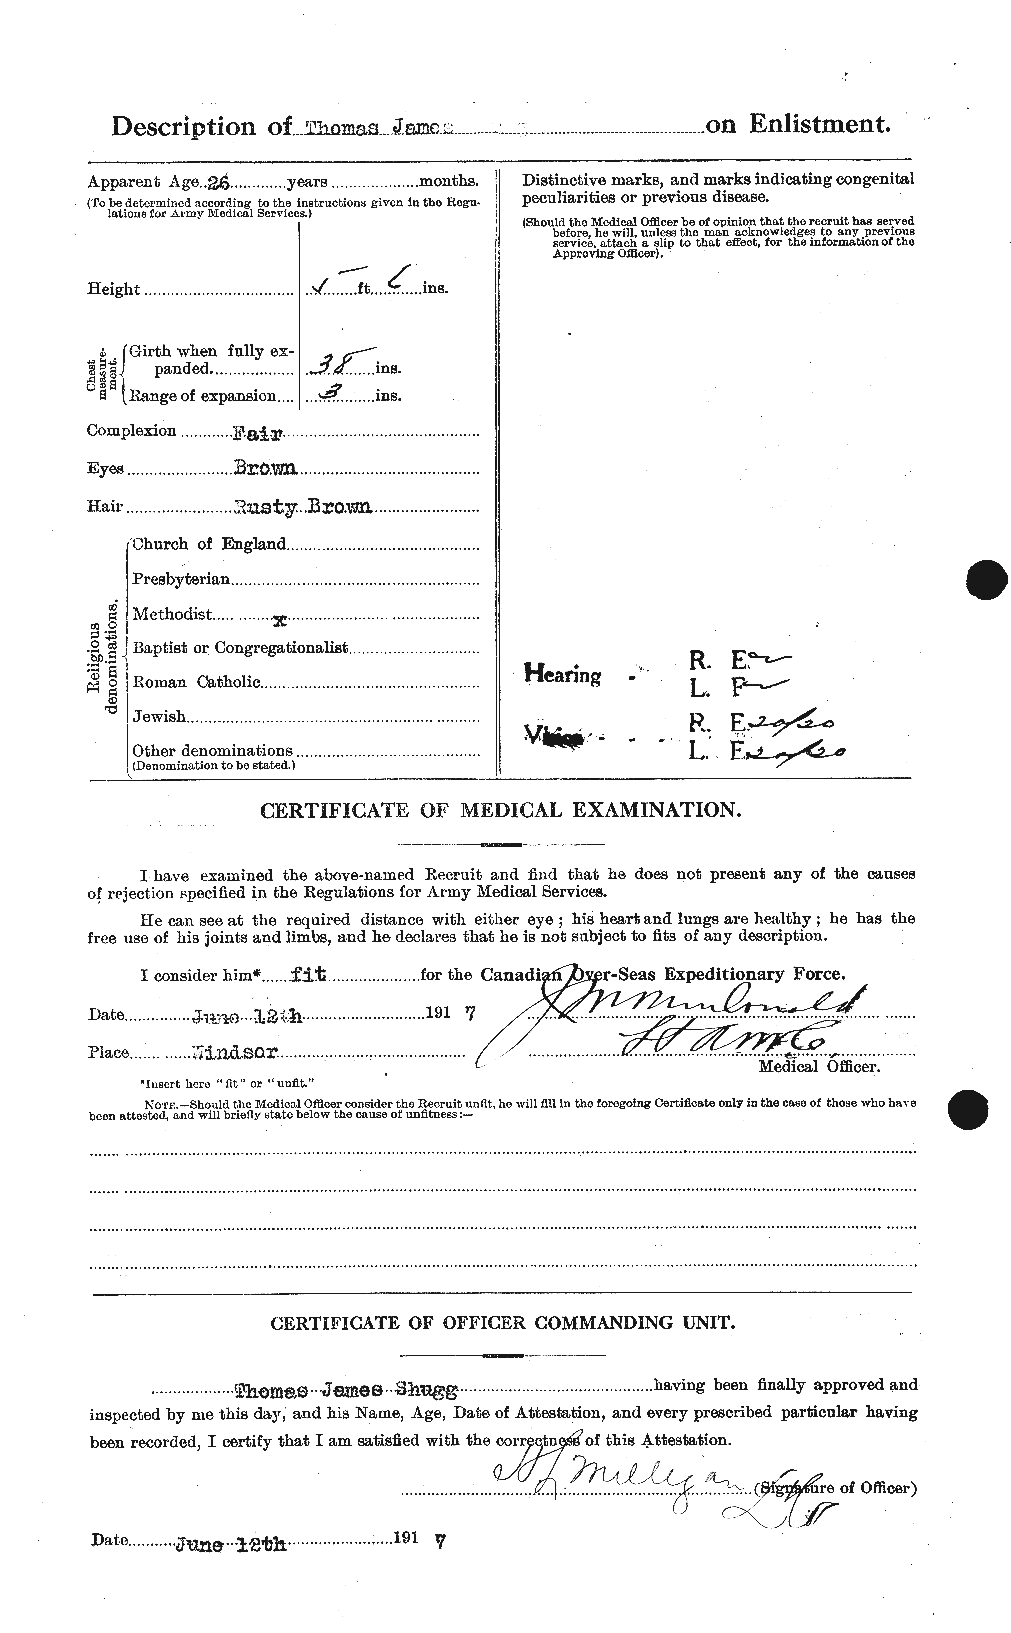 Personnel Records of the First World War - CEF 097534b